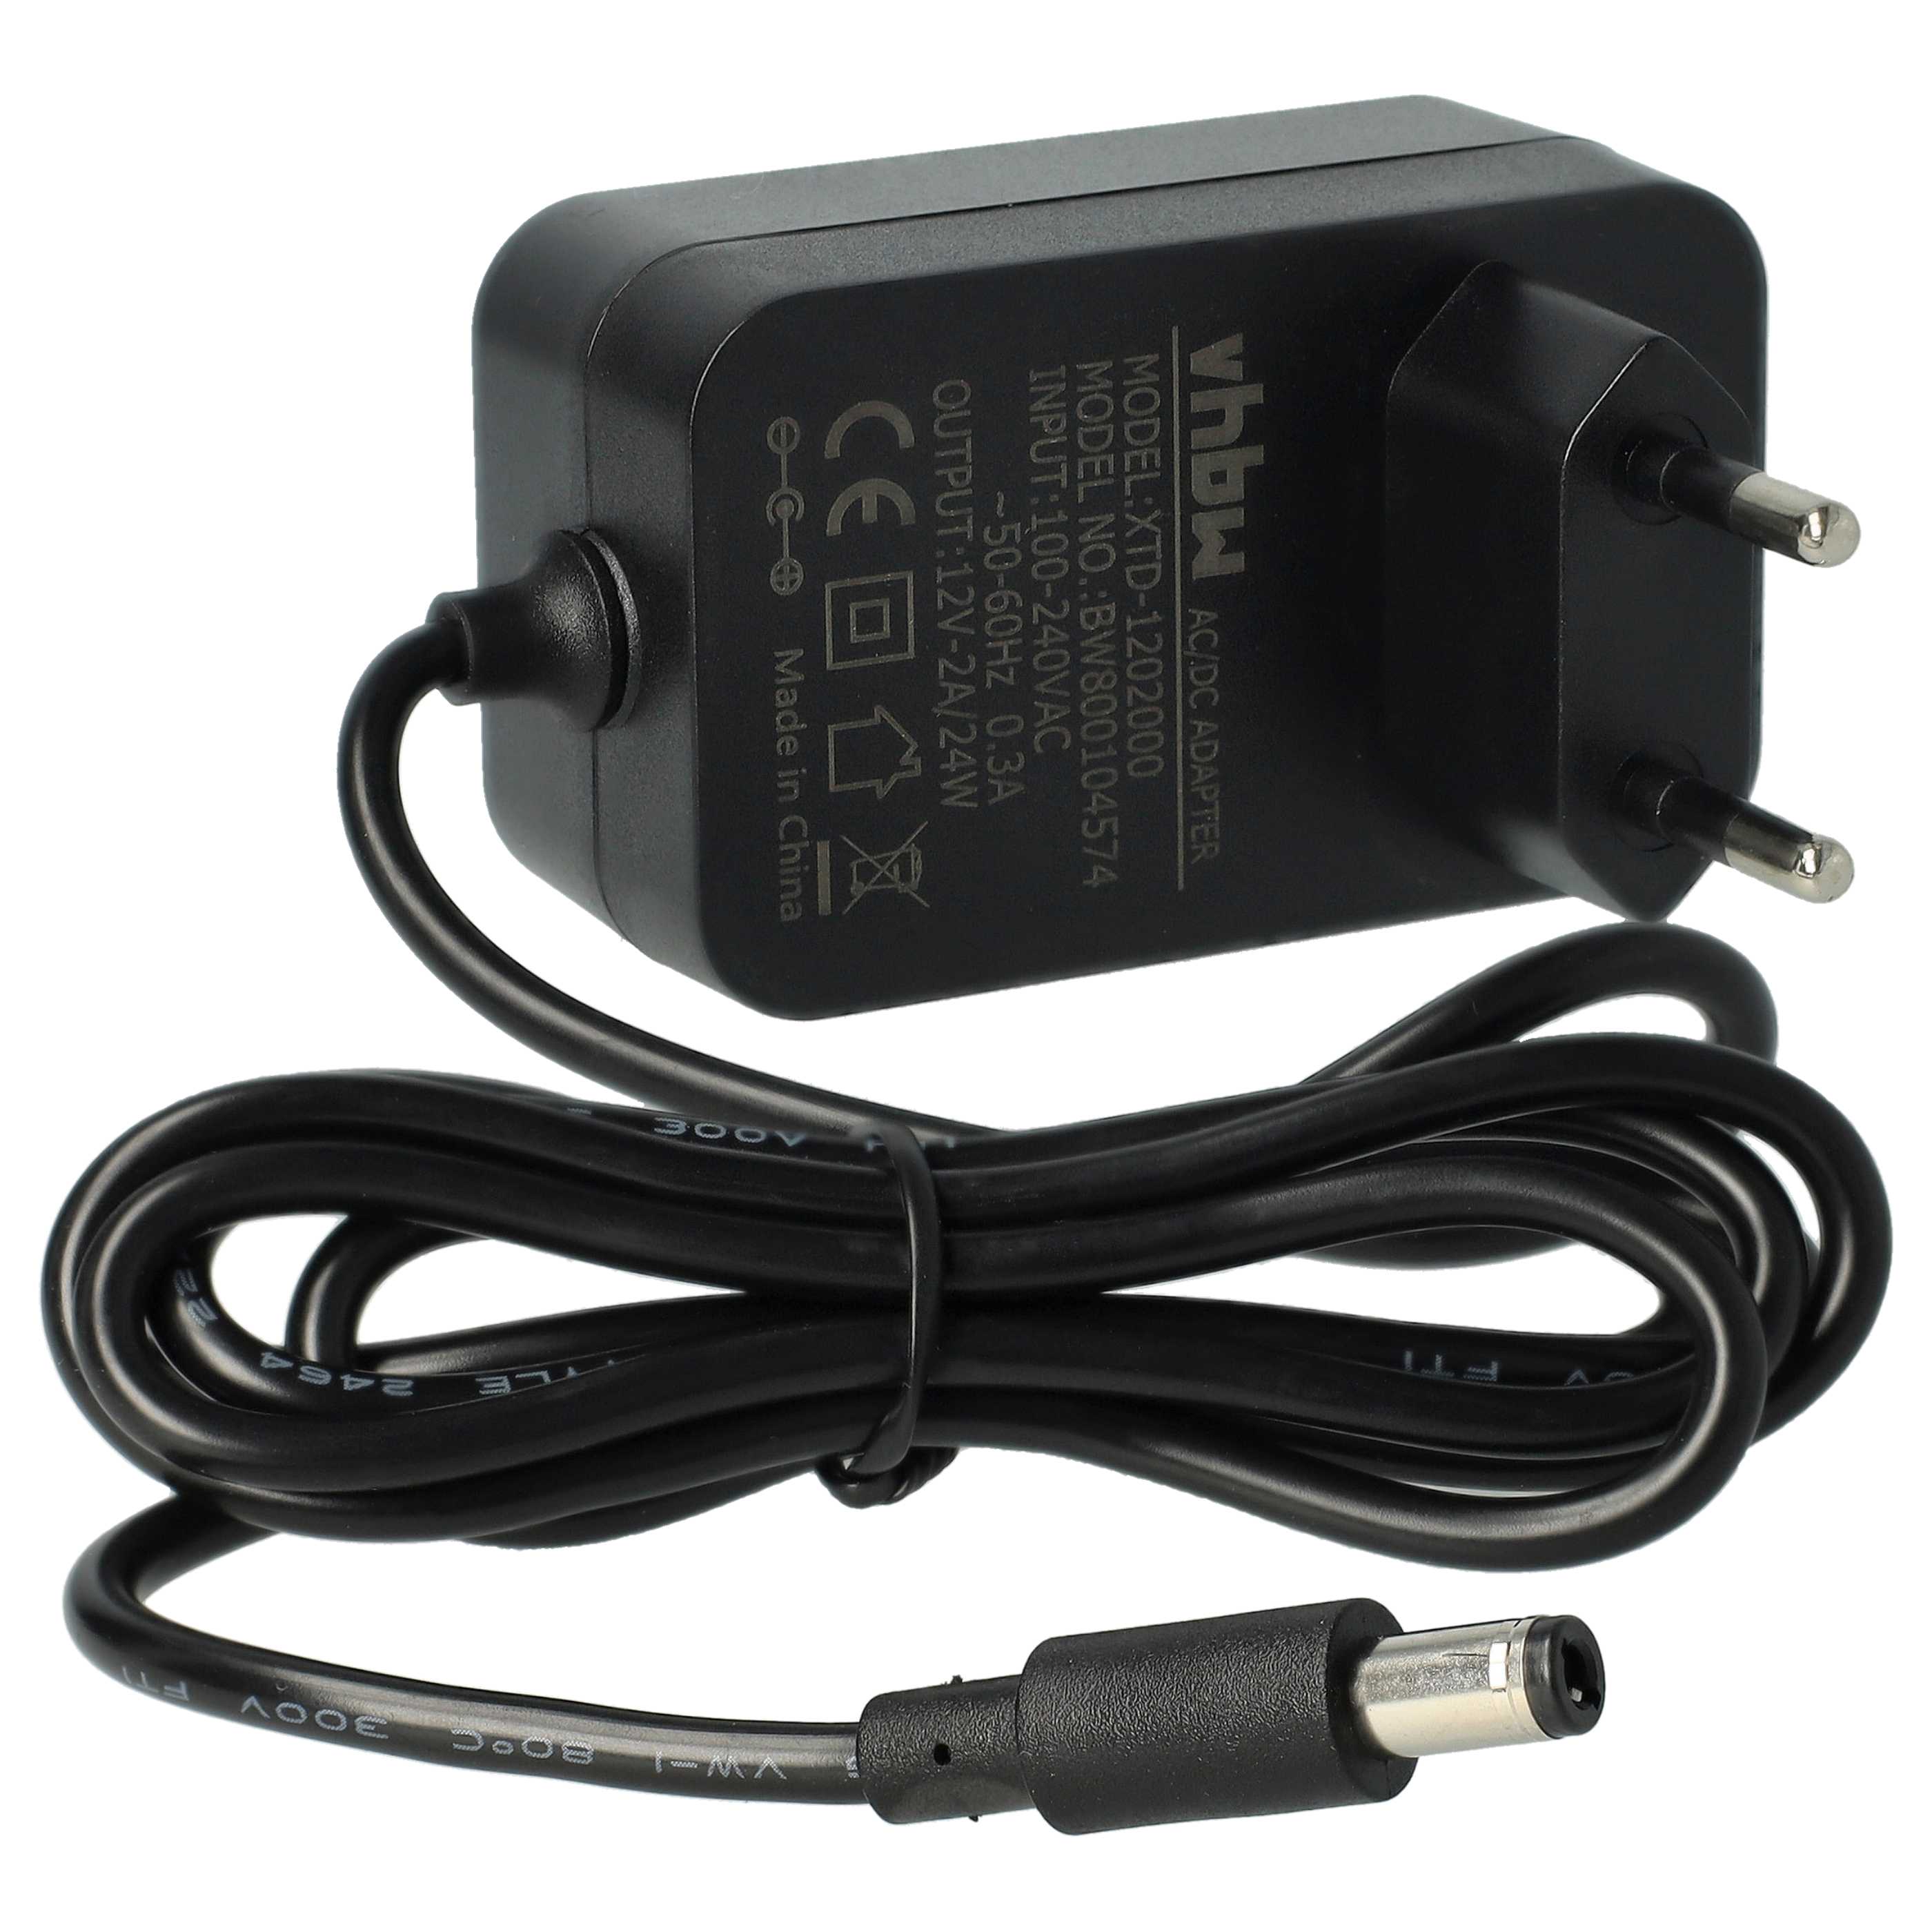 Mains Power Adapter replaces AVM 311POW165, 311POW134 for AVM router etc. - 140 cm